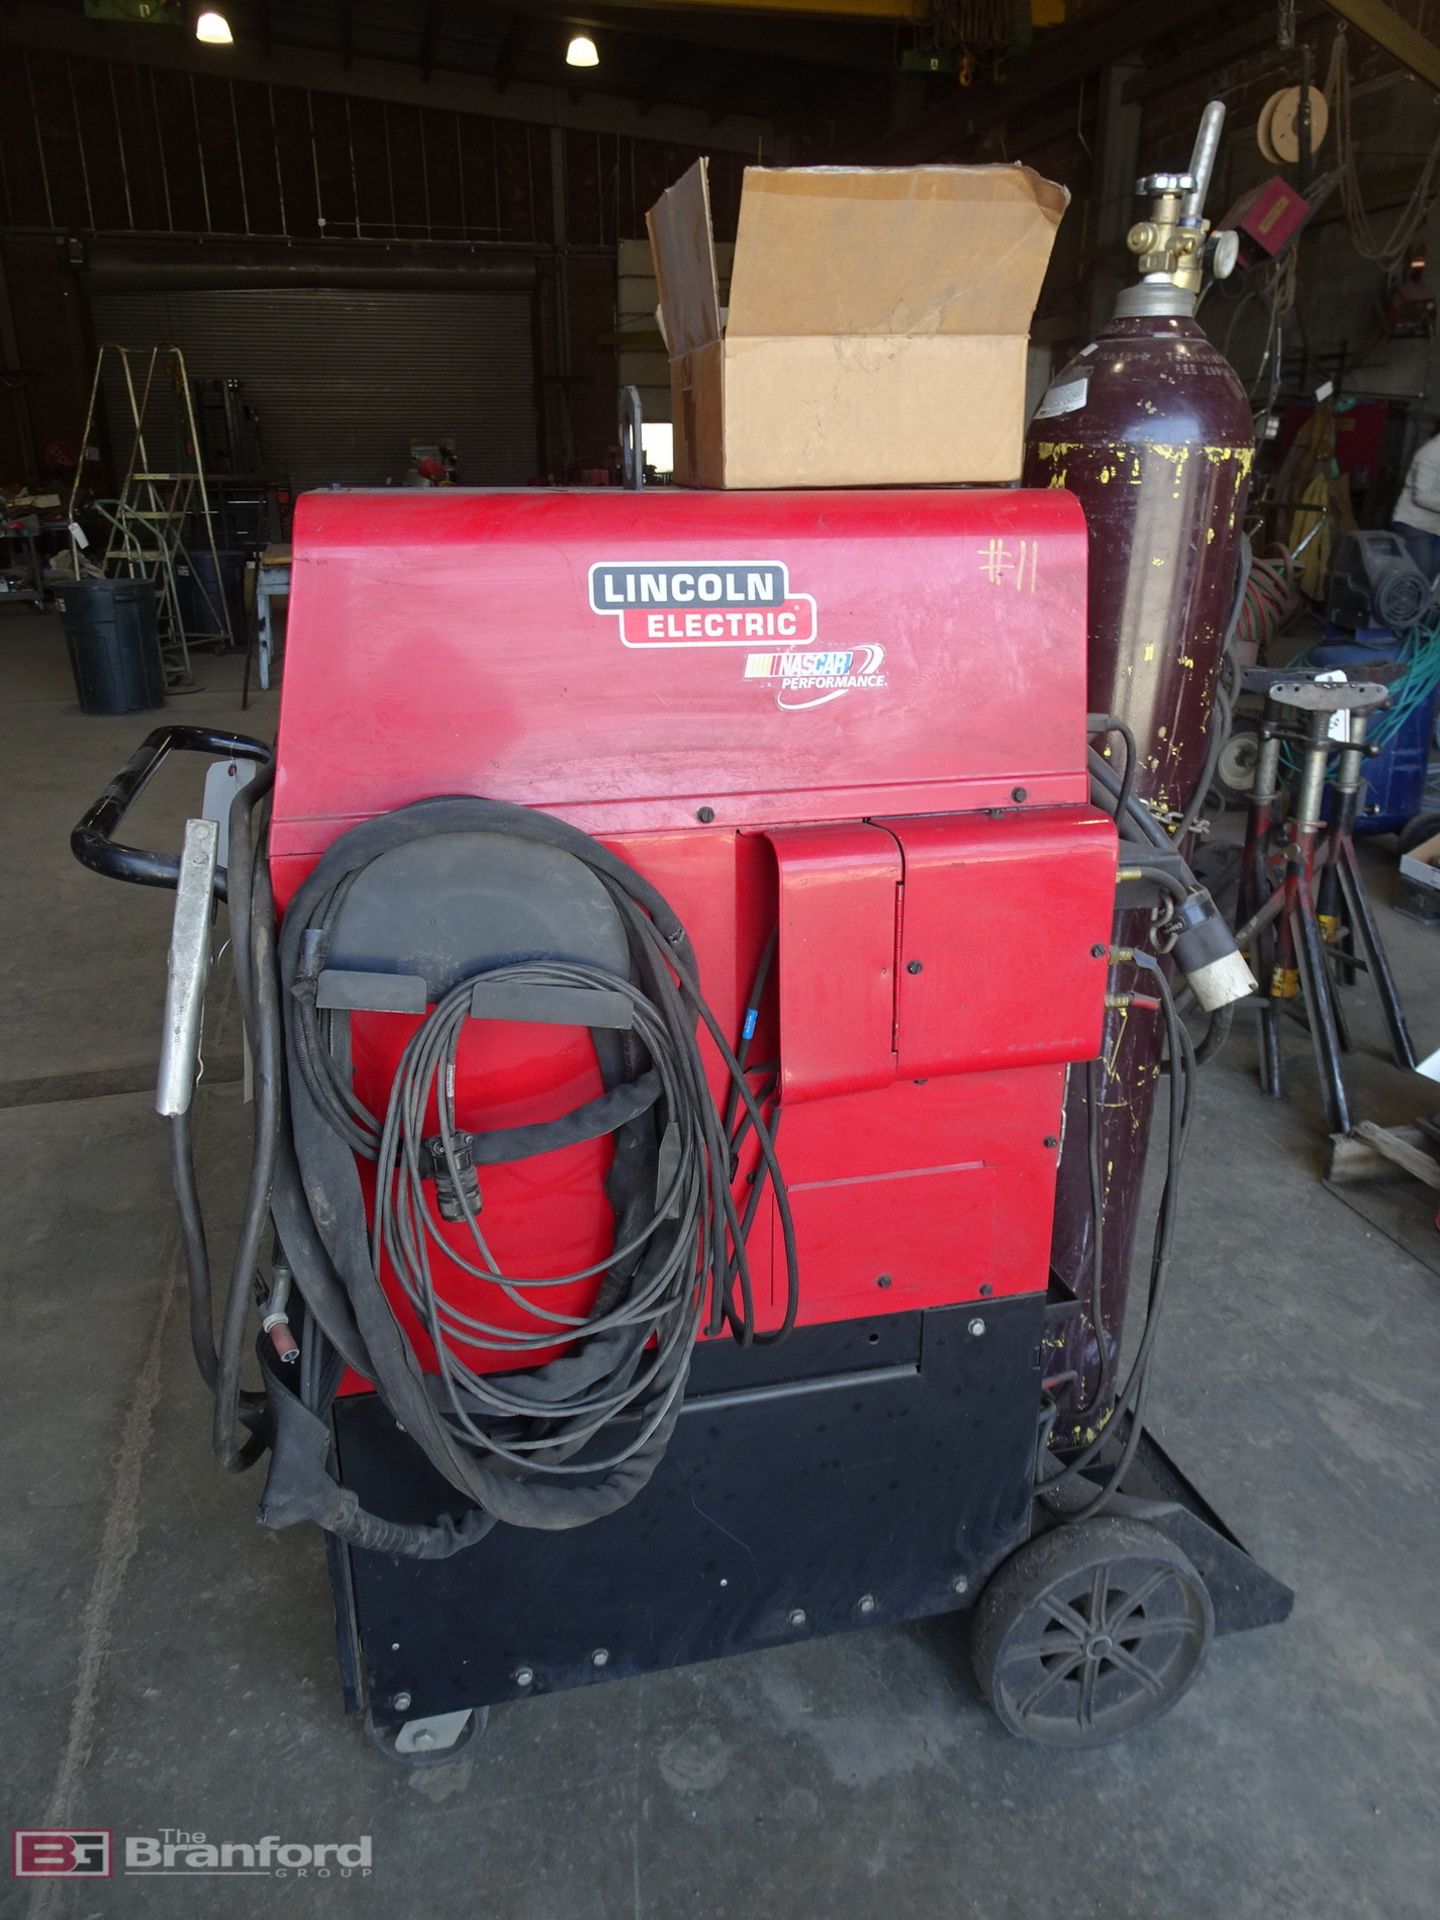 Lincoln Electric Model Precision TIG275, Portable TIG Welding System - Image 4 of 9